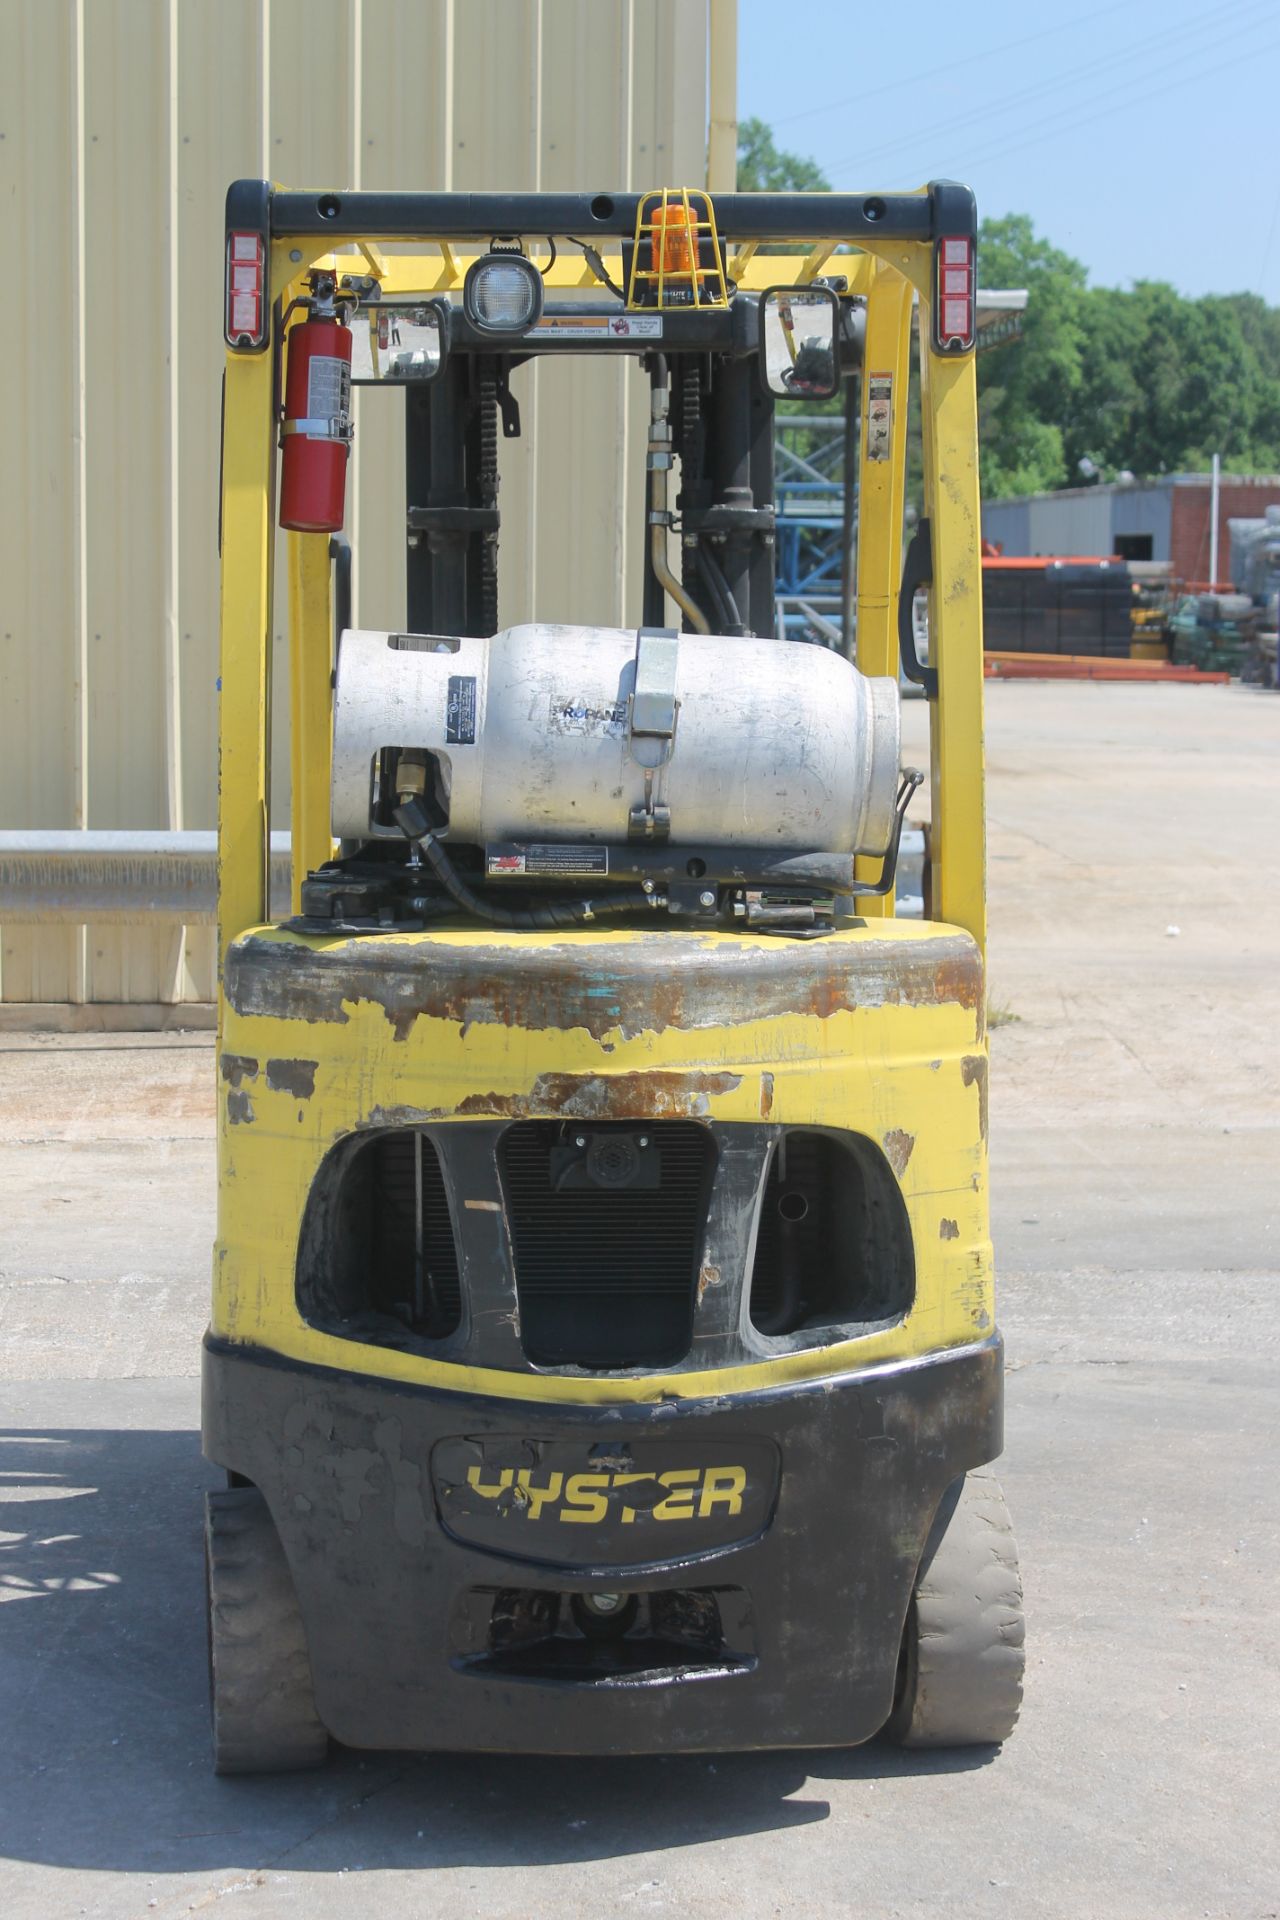 2012 HYSTER 5000 LB CAPACITY PROPANE FORKLIFT, 3 STAGE MAST (CHECK VIDEO) - Image 7 of 7